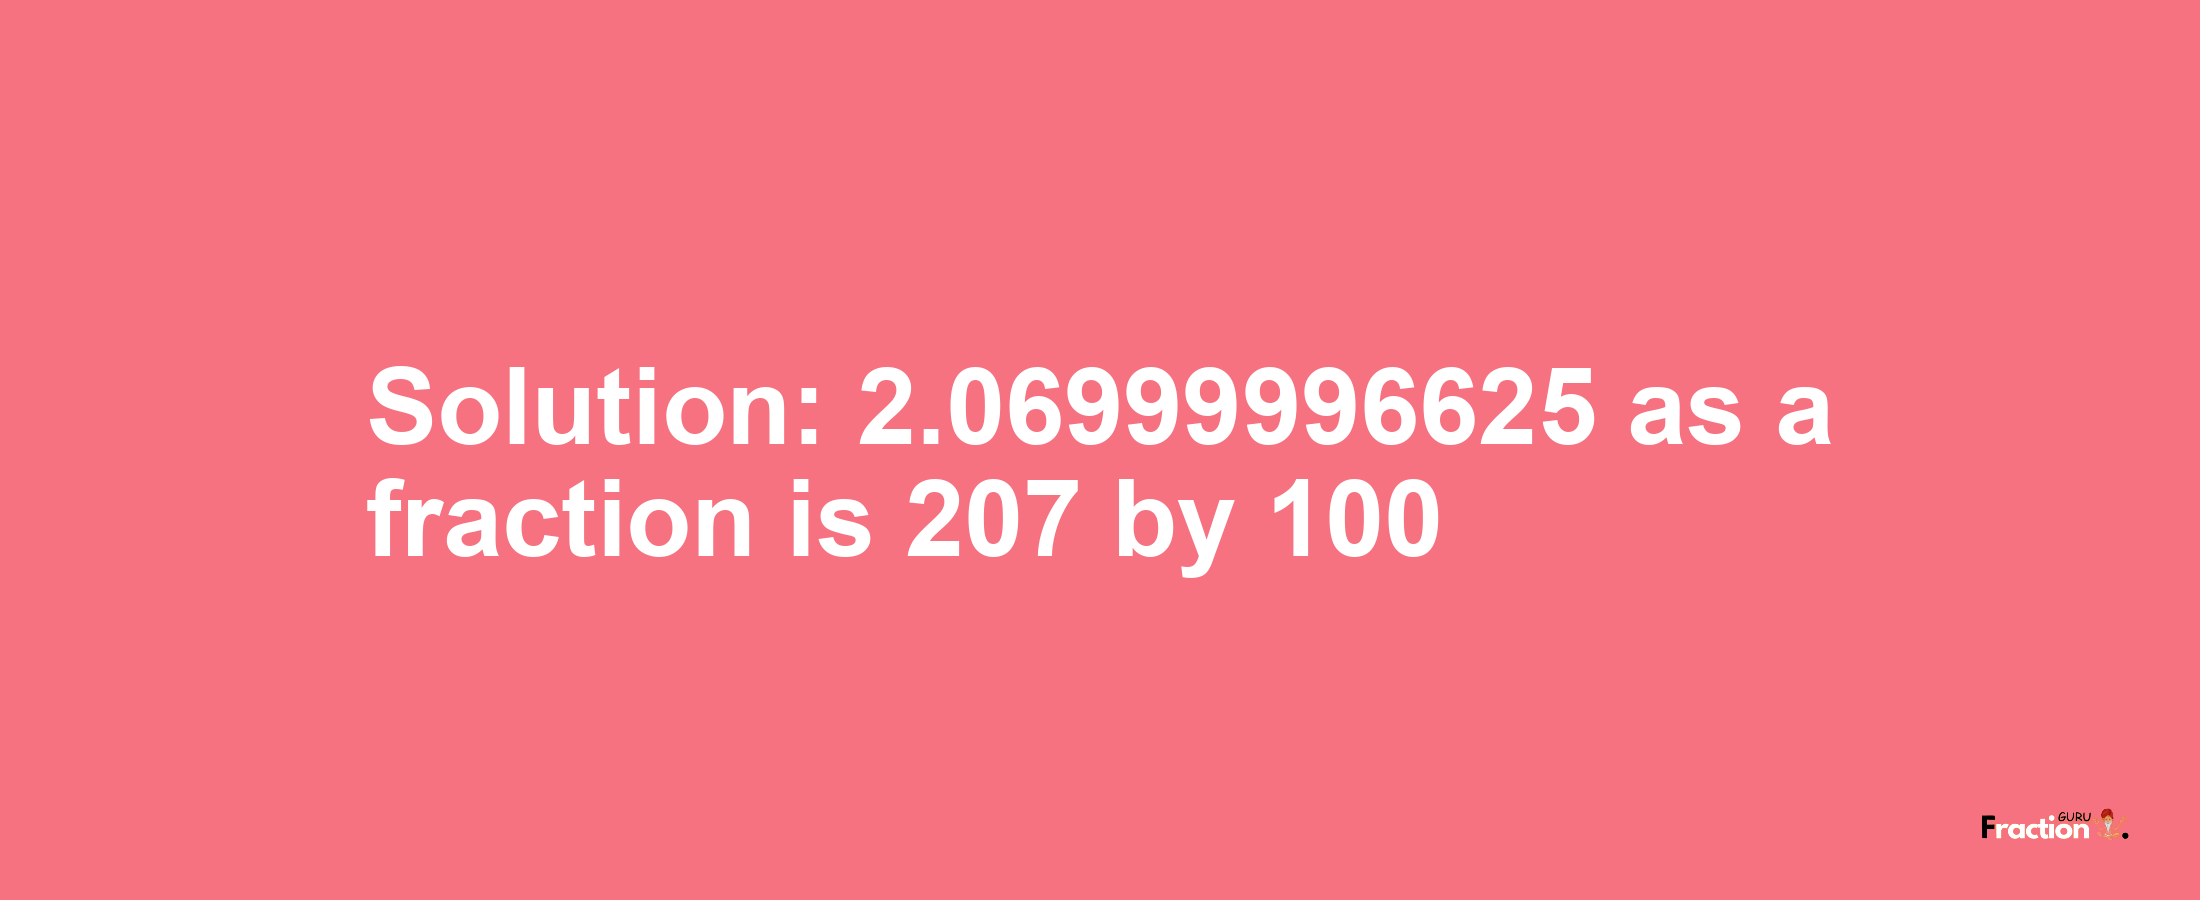 Solution:2.06999996625 as a fraction is 207/100